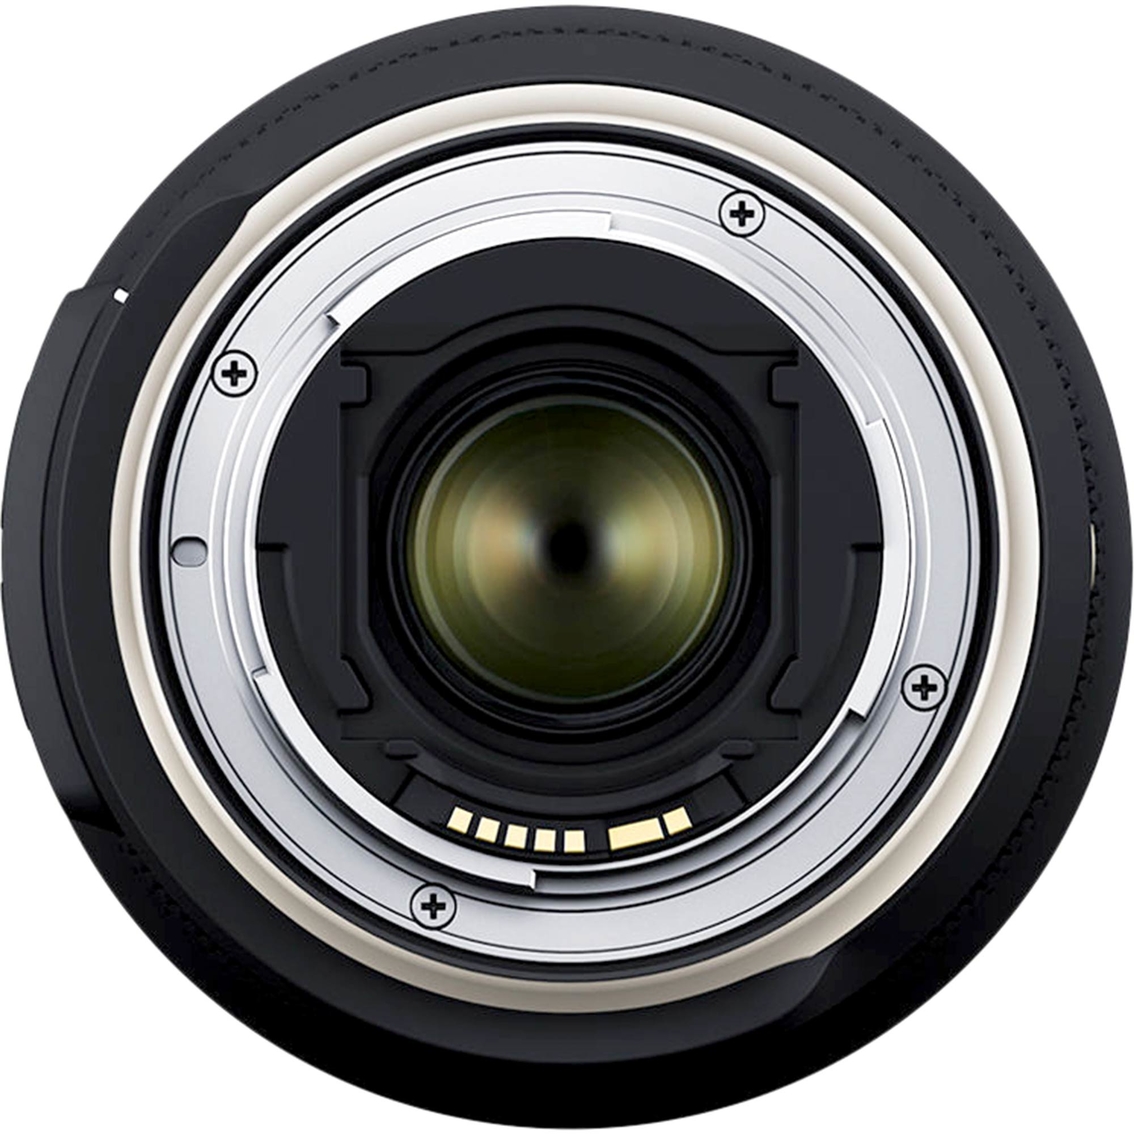 Tamron Lens 15-30 G2 F2.8 VC Canon Lens - Image 5 of 5